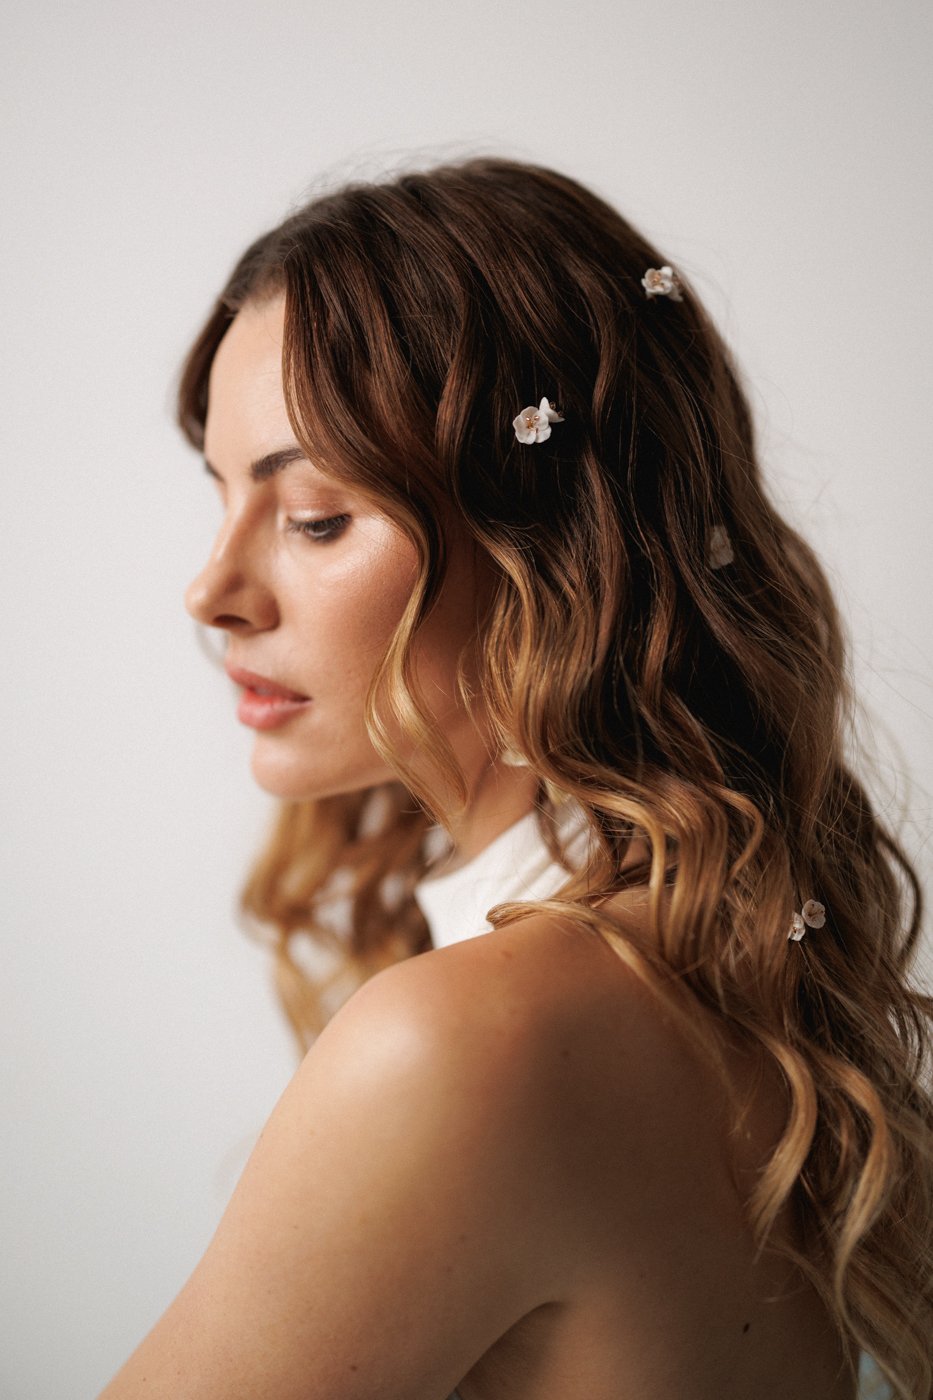 Contemporary-modern-bridal hair and makeup-Lottie Topping-8.jpg